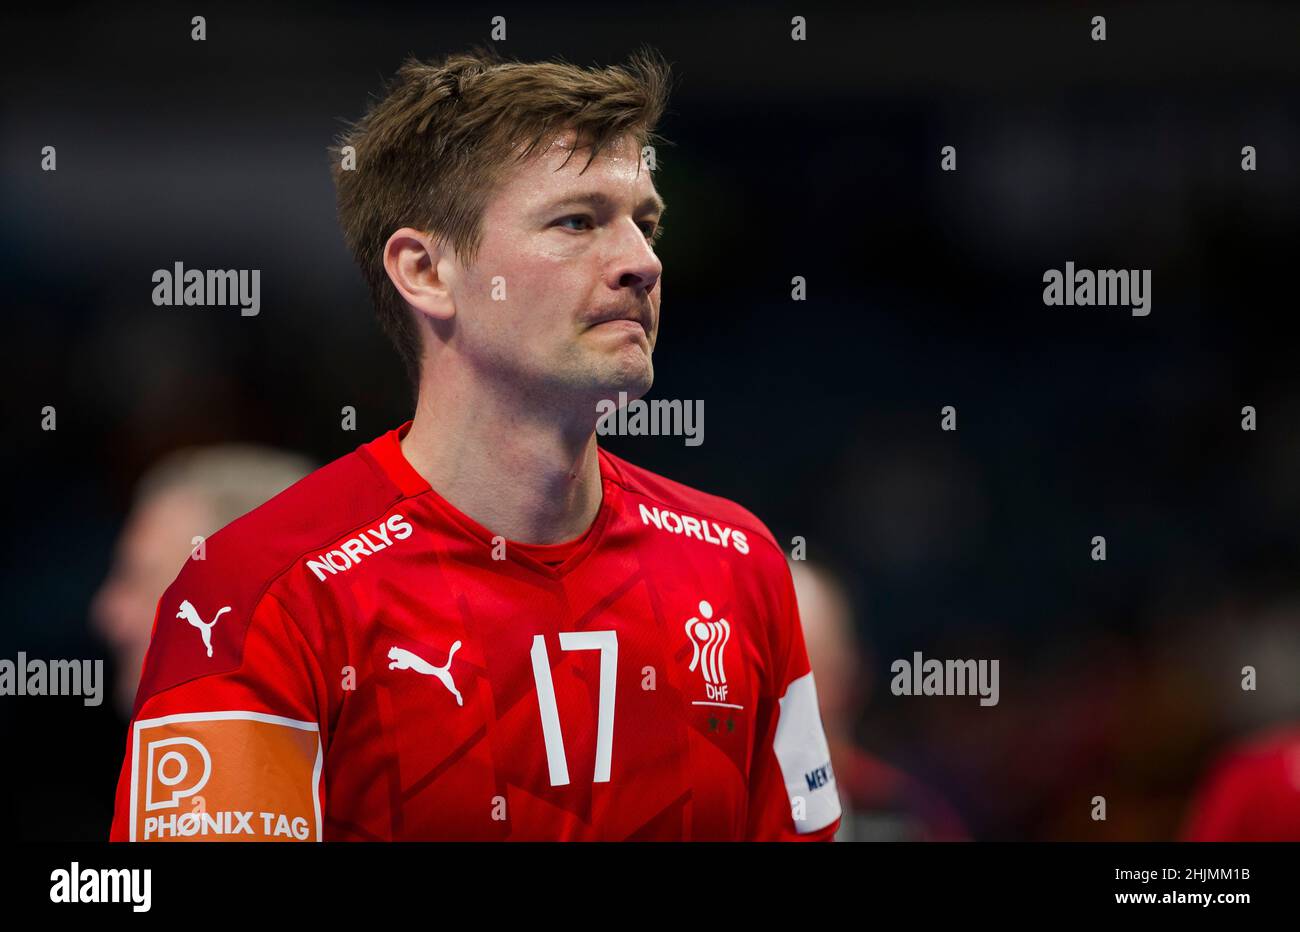 Lasse svan denmark hi-res stock photography and images - Alamy